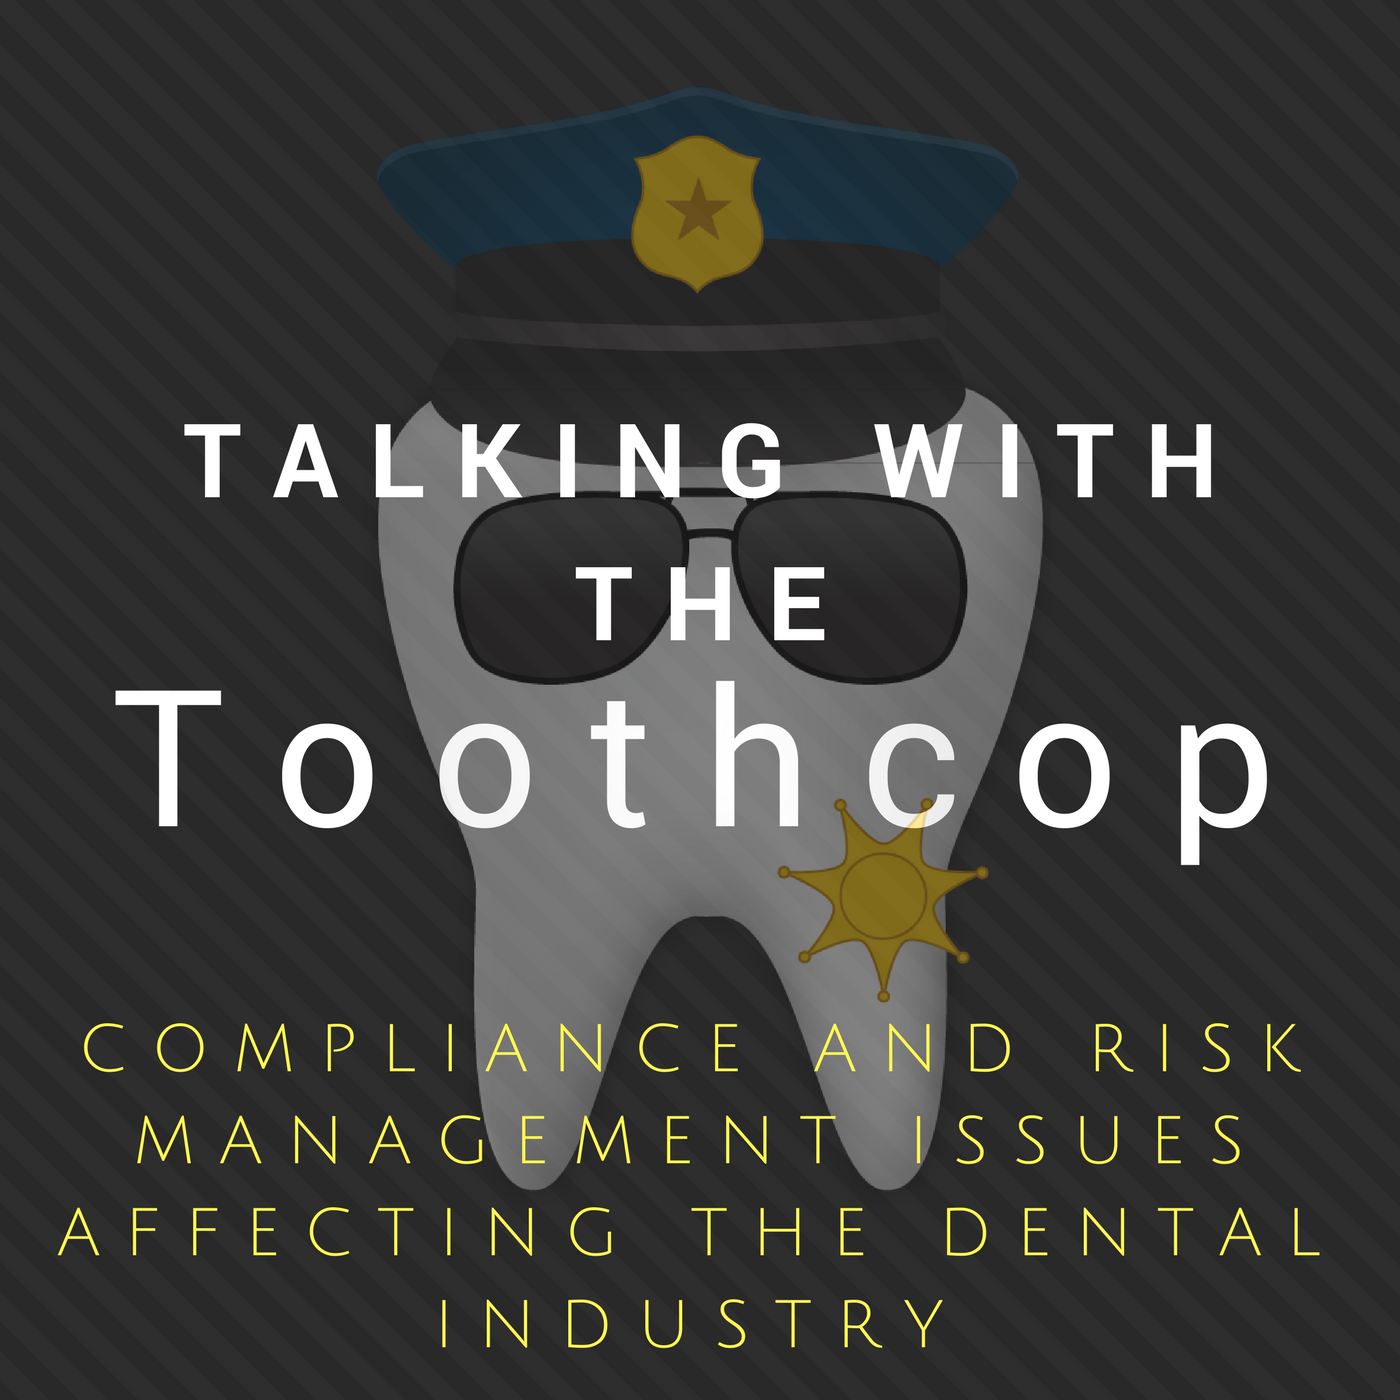 How To Keep Your Patients Safe with Dental Waterline Maintenance - Mike Rust and Monica Boldt